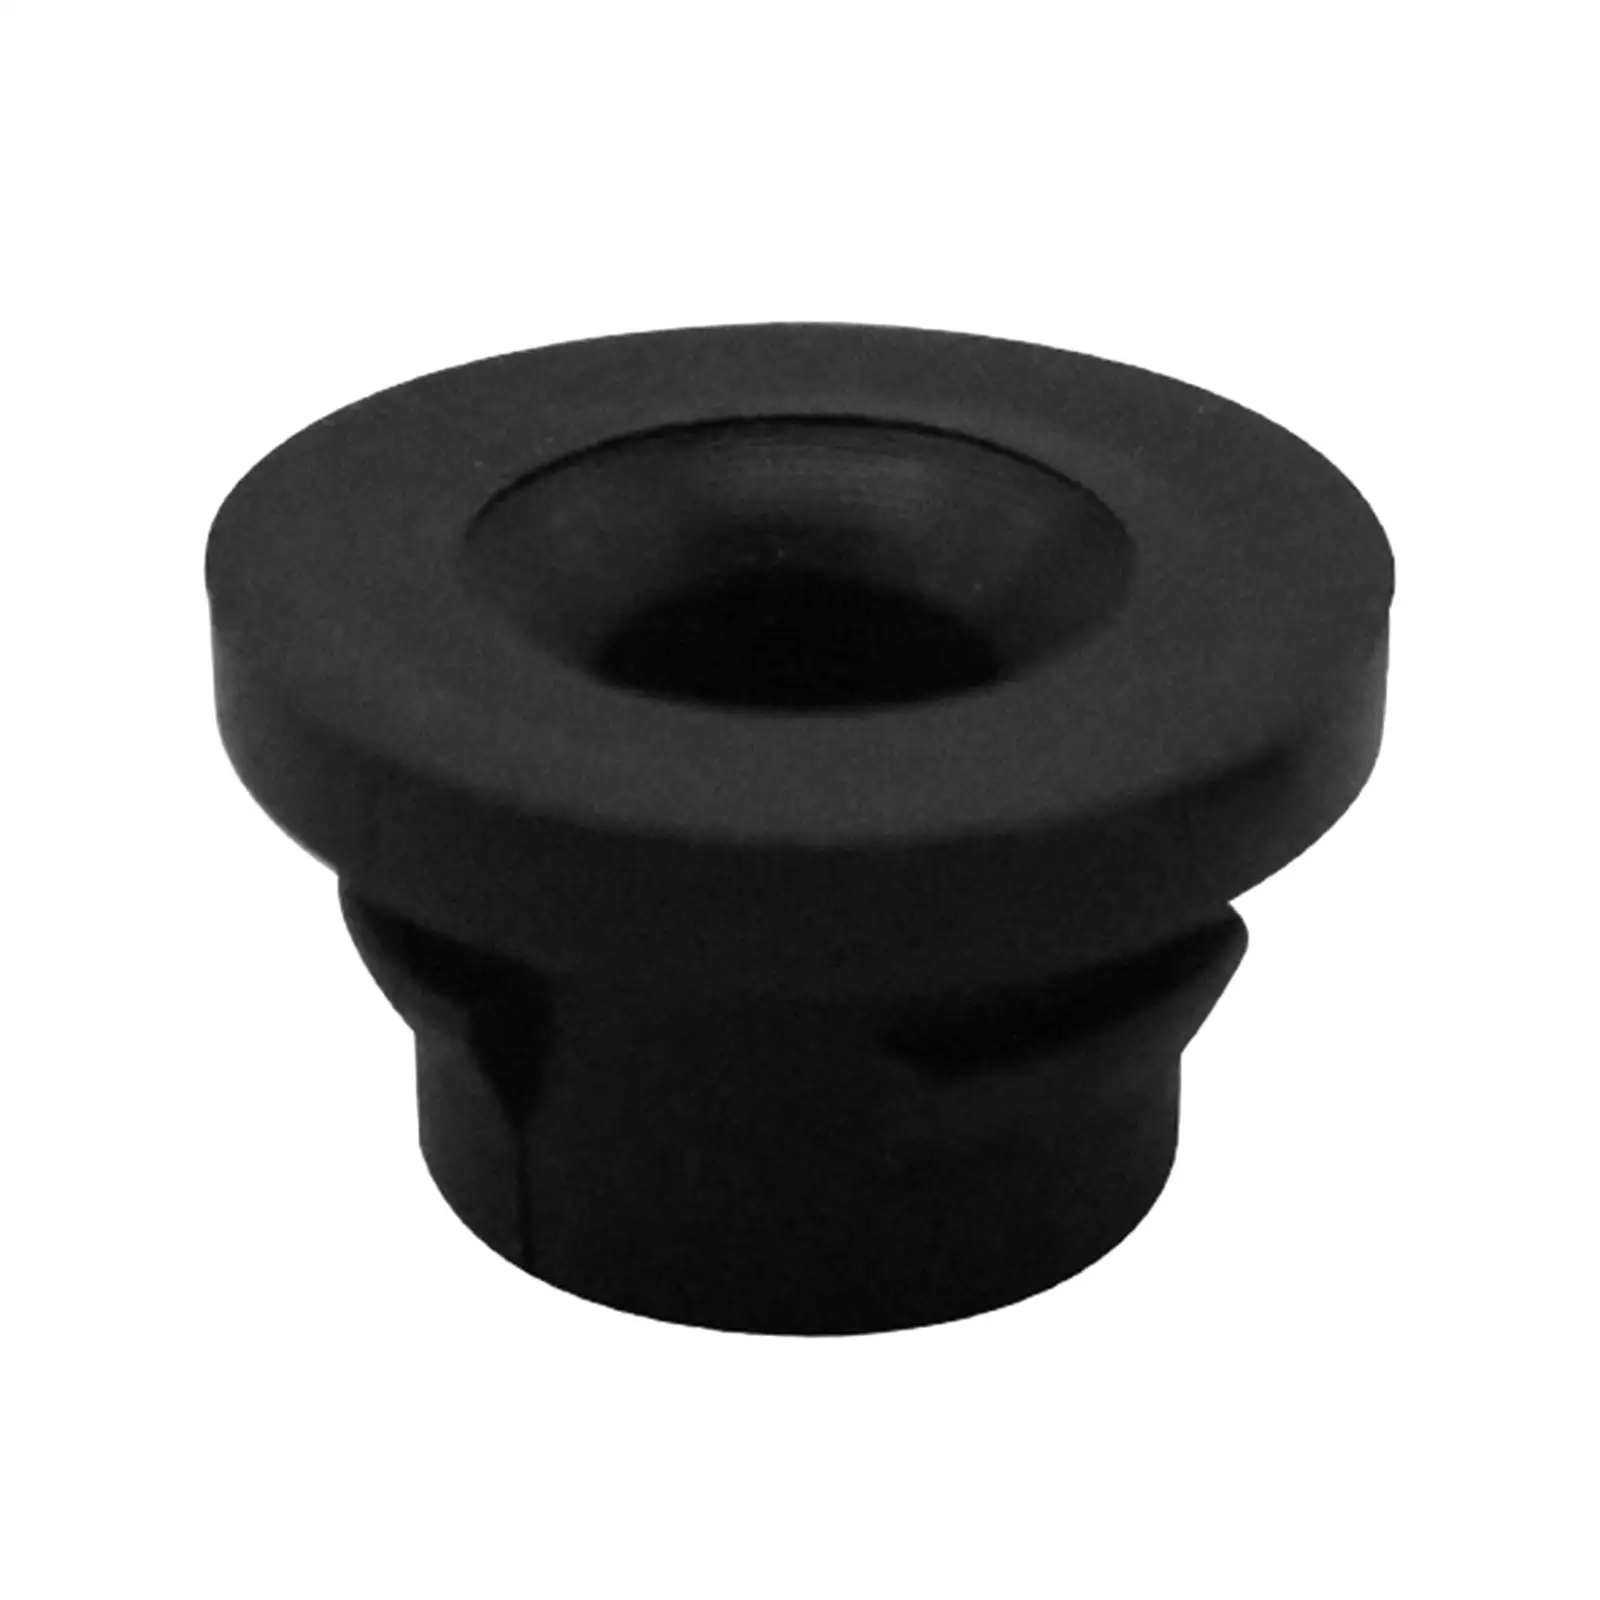 Car Air Filter Rubber Insert 1422 A3 Fit for 1.6 Hdi for